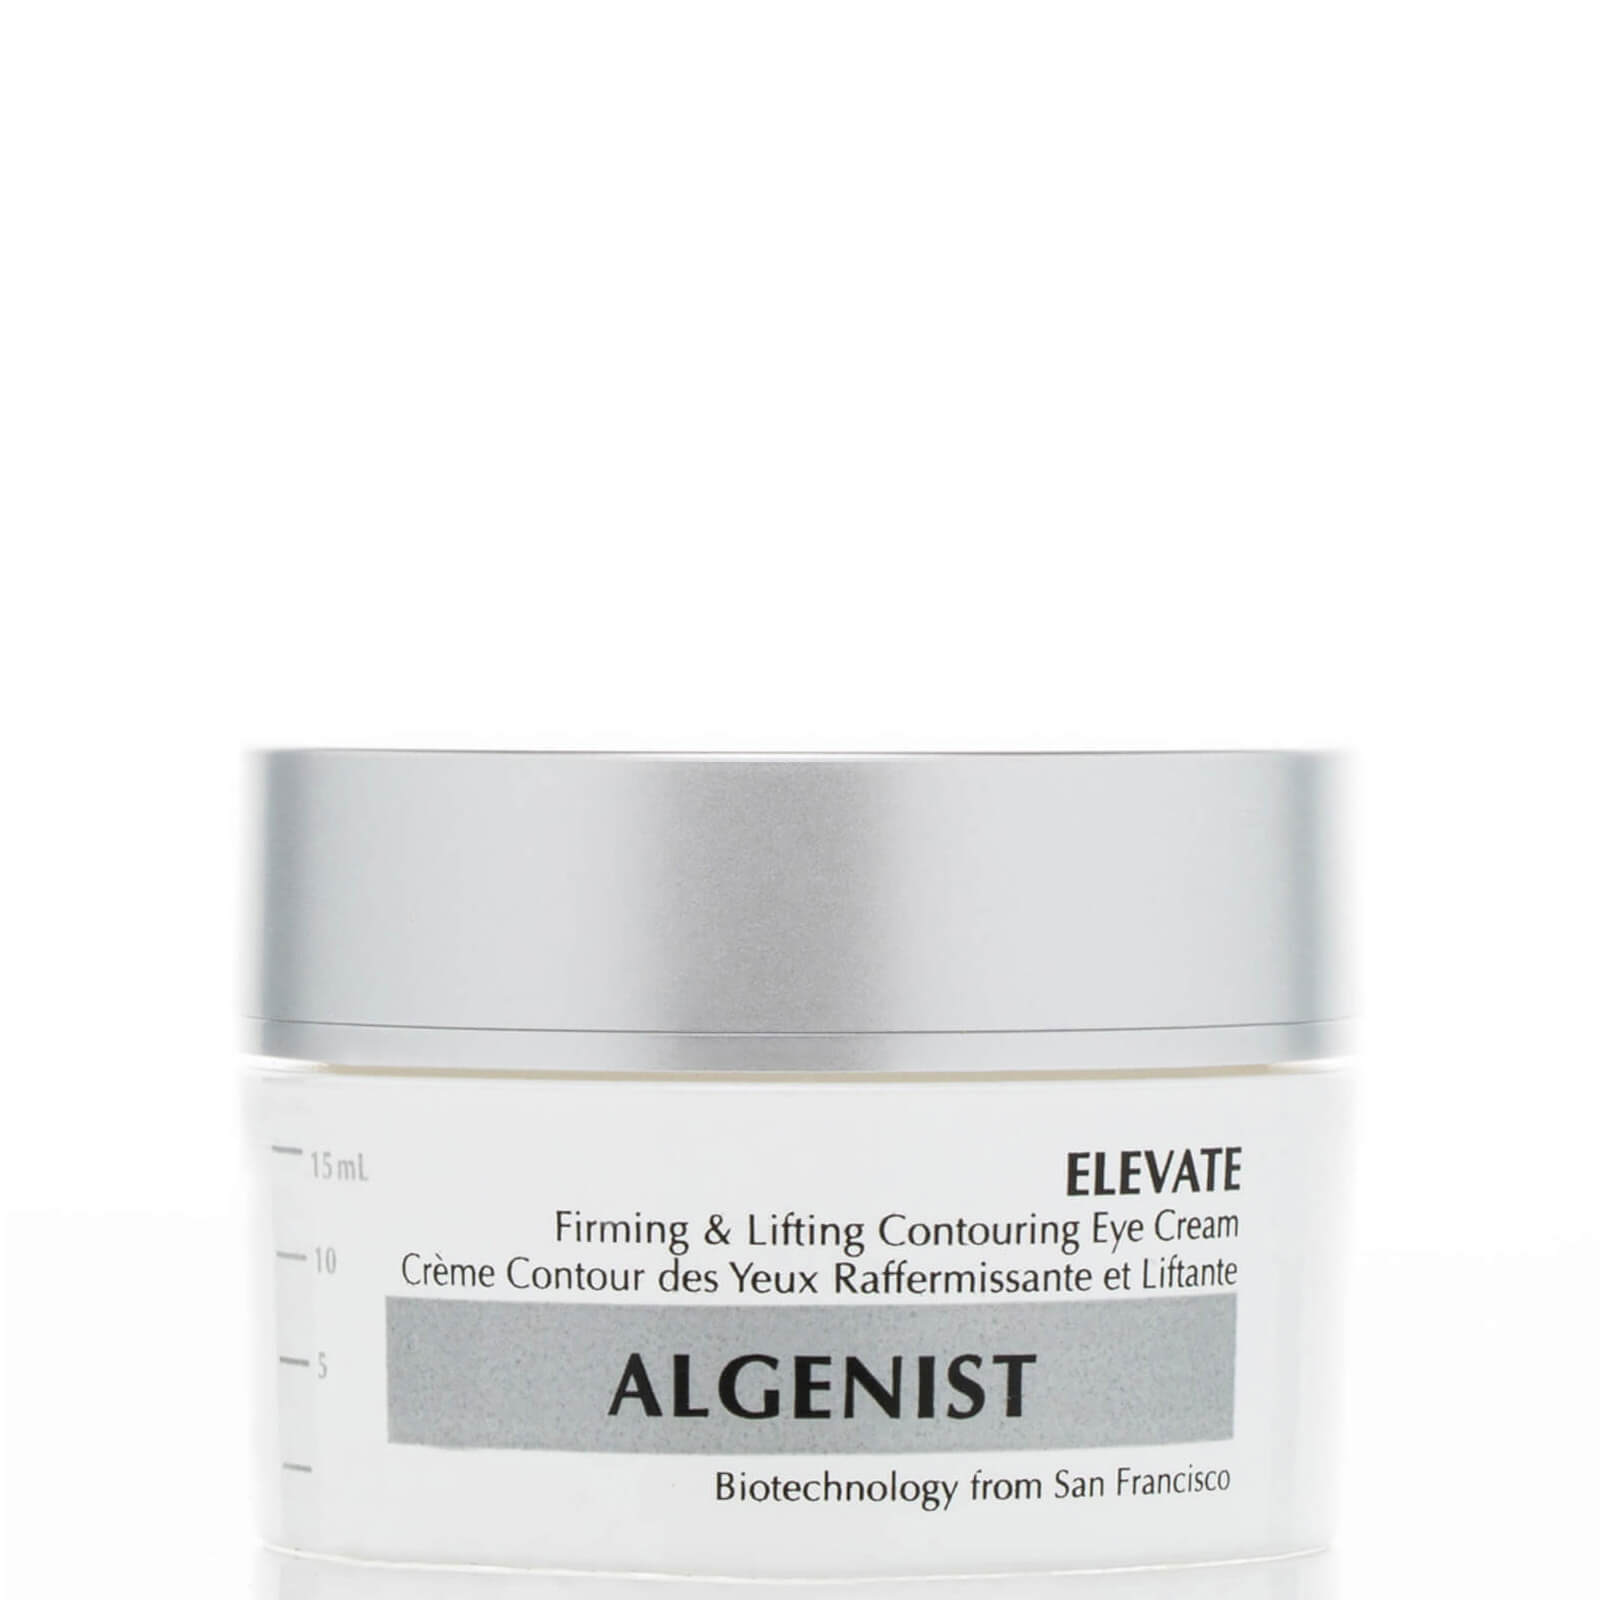 Photos - Cream / Lotion Algenist ELEVATE Firming and Lifting Contouring Eye Cream 15ml 